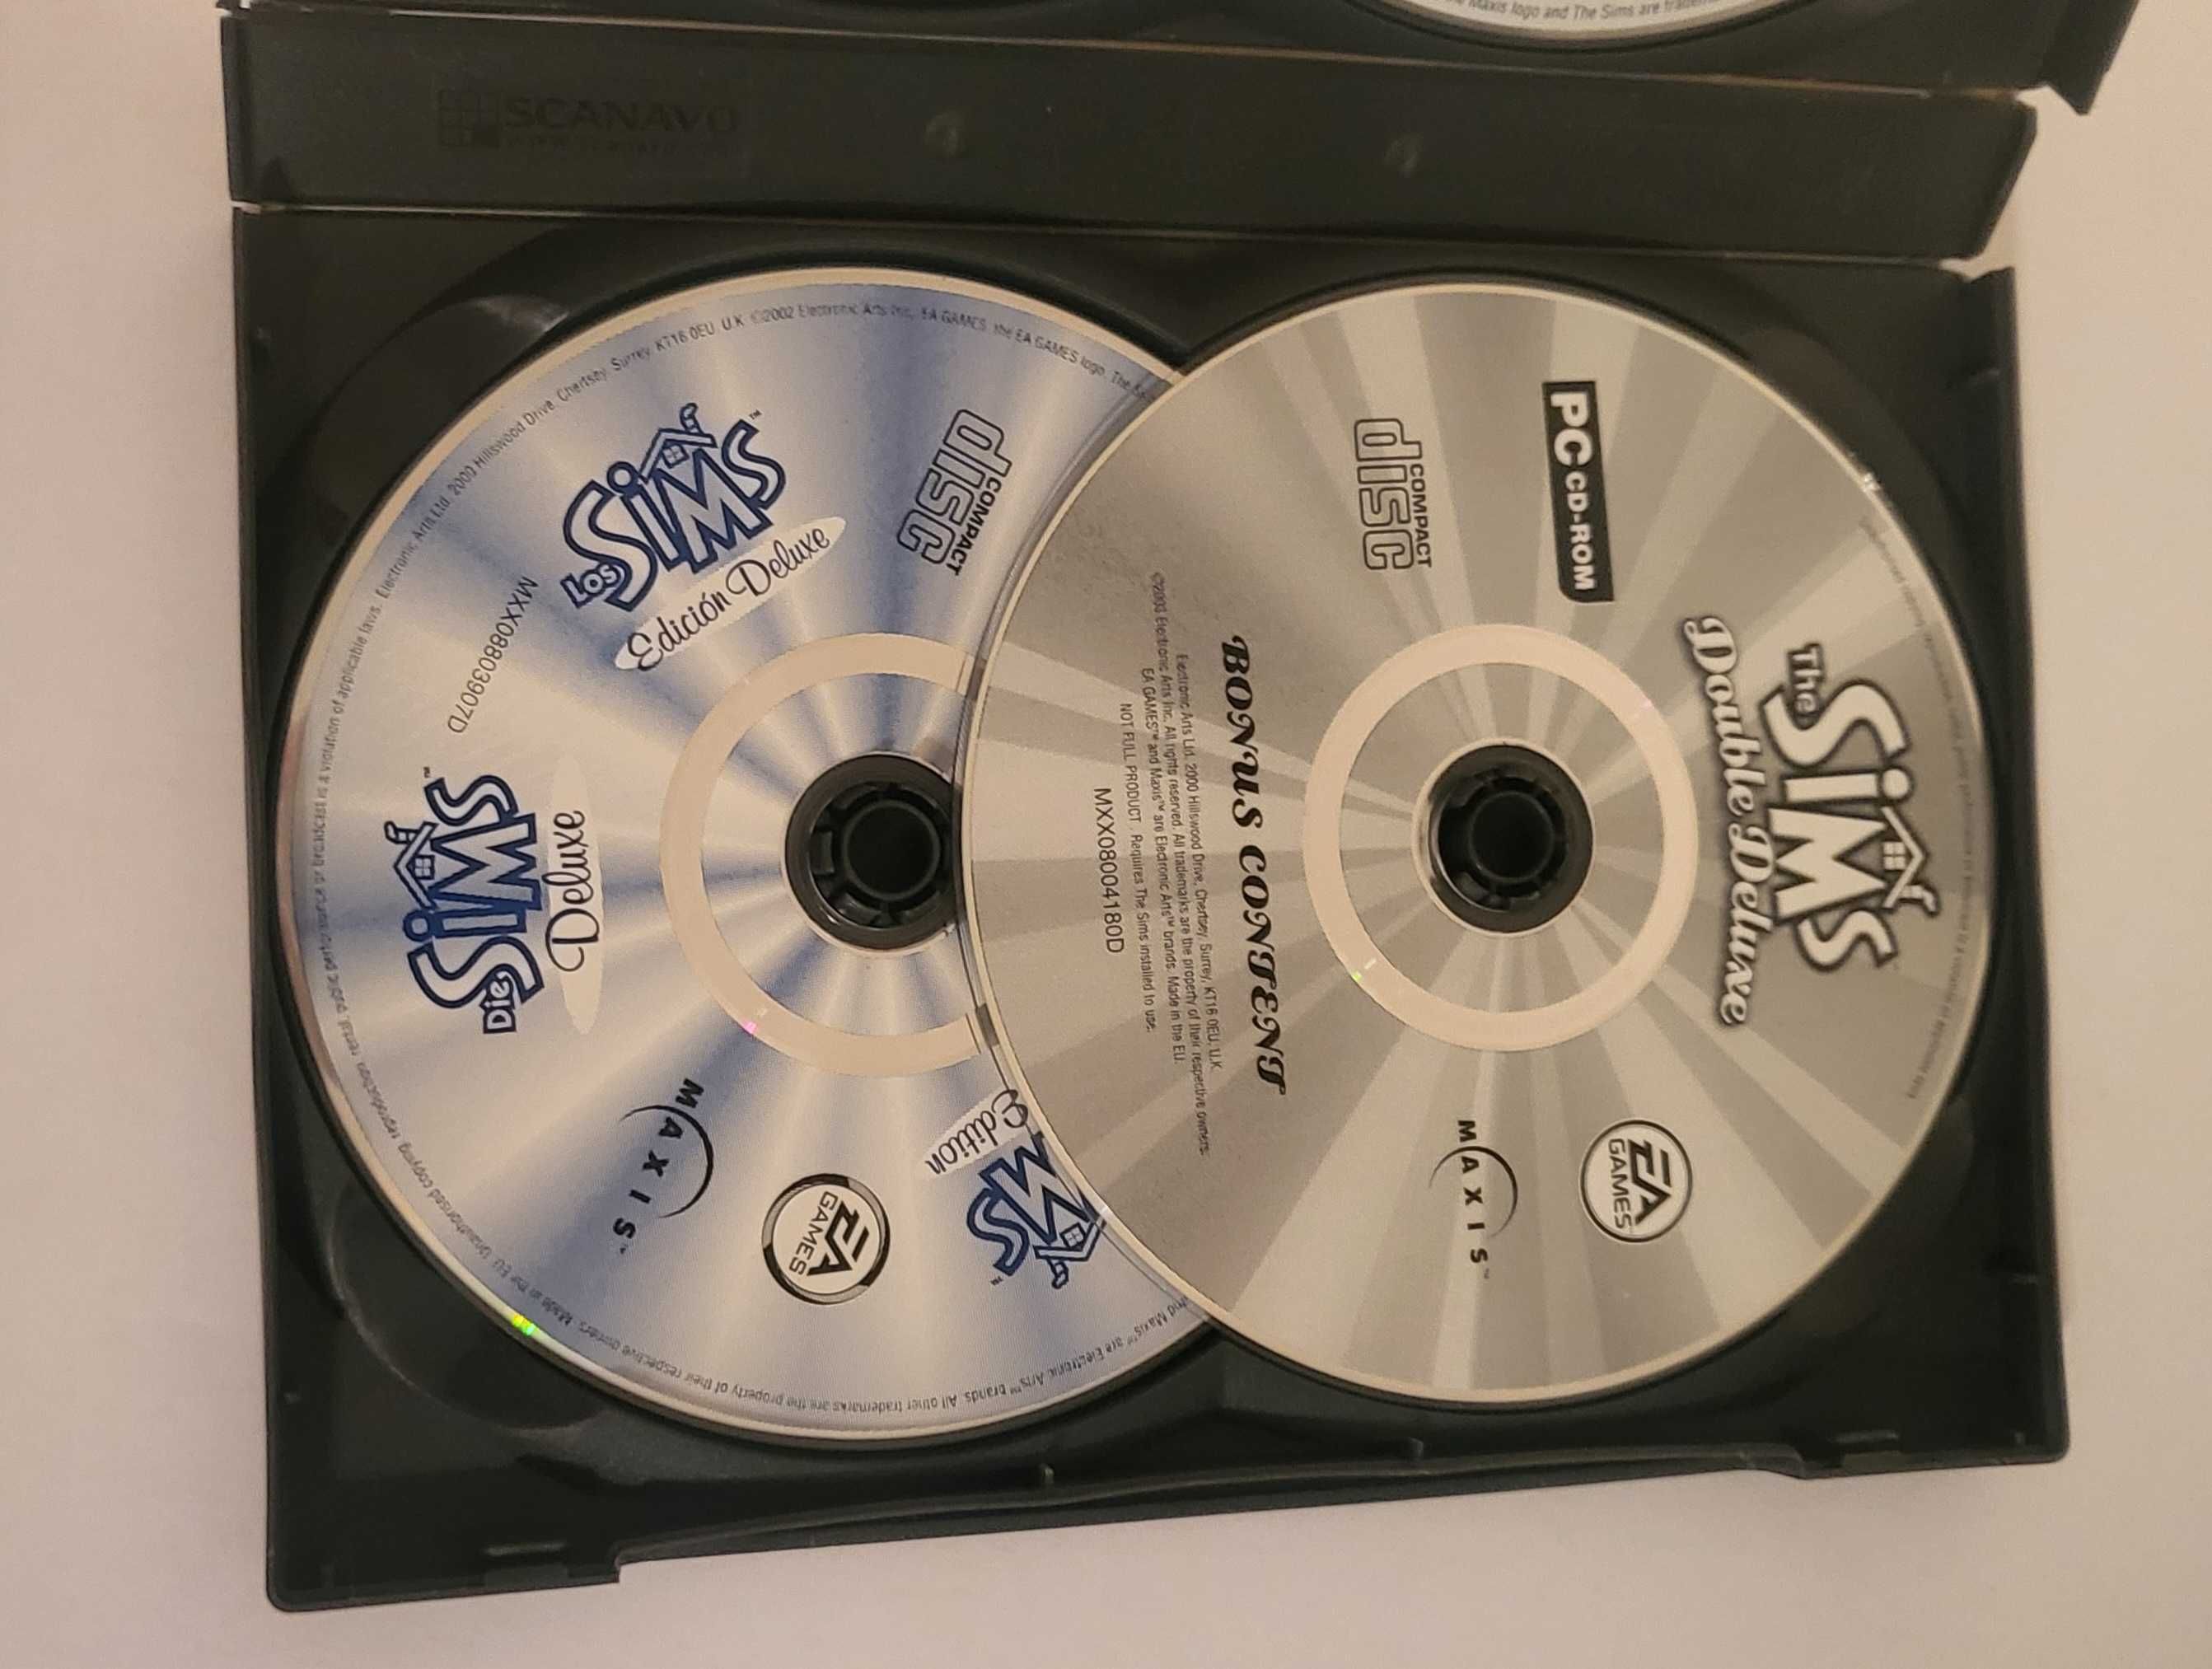 The Sims Double Deluxe